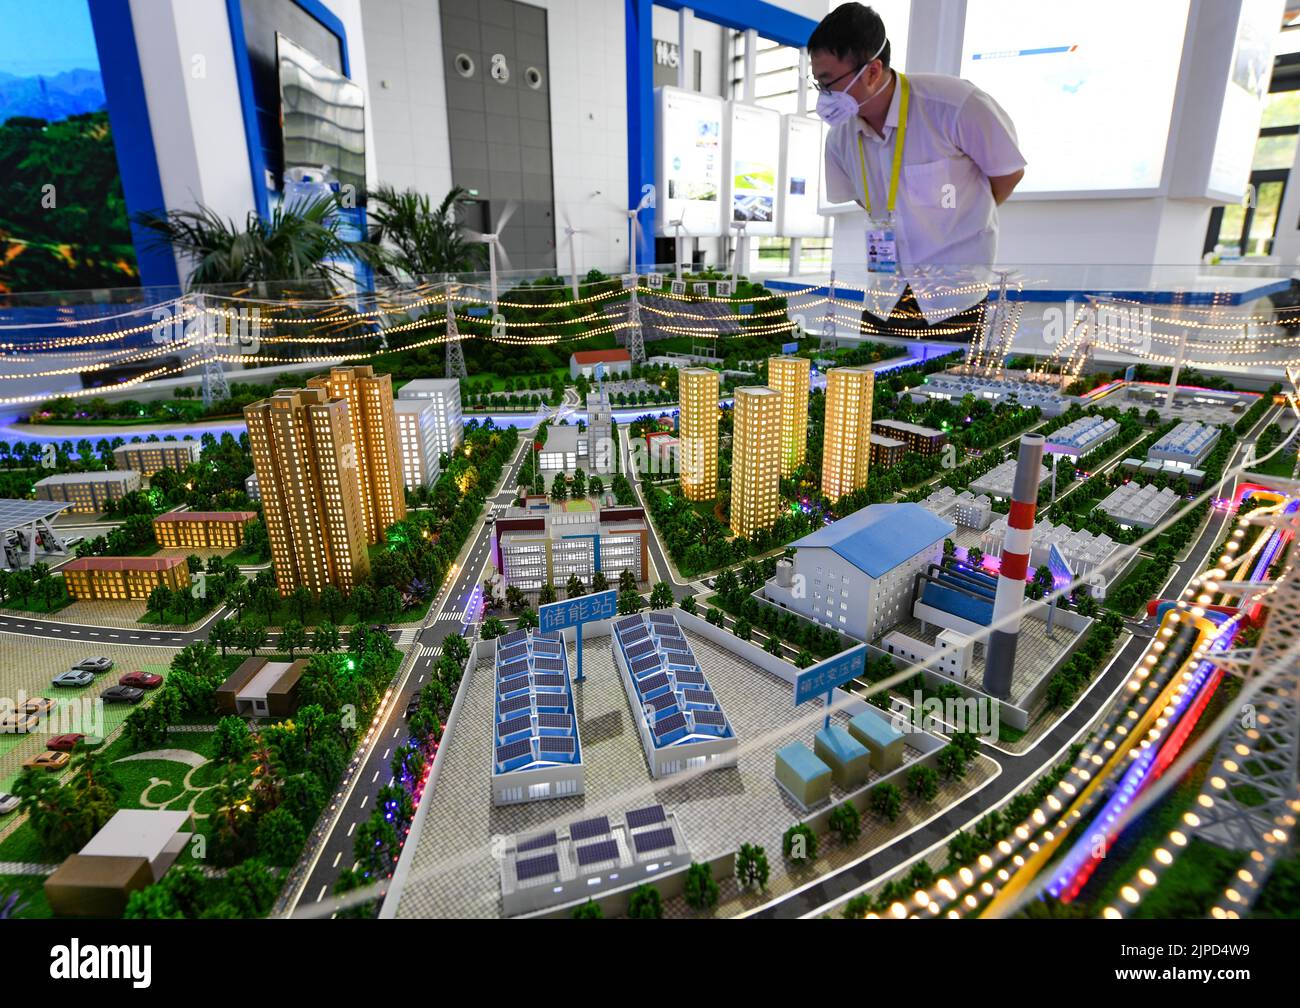 Xi'an, China's Shaanxi Province. 16th Aug, 2022. A staff checks a new energy project model at the booth of China Energy Engineering Group during the sixth Silk Road International Exposition in Xi'an, northwest China's Shaanxi Province, Aug. 16, 2022. Credit: Zou Jingyi/Xinhua/Alamy Live News Stock Photo